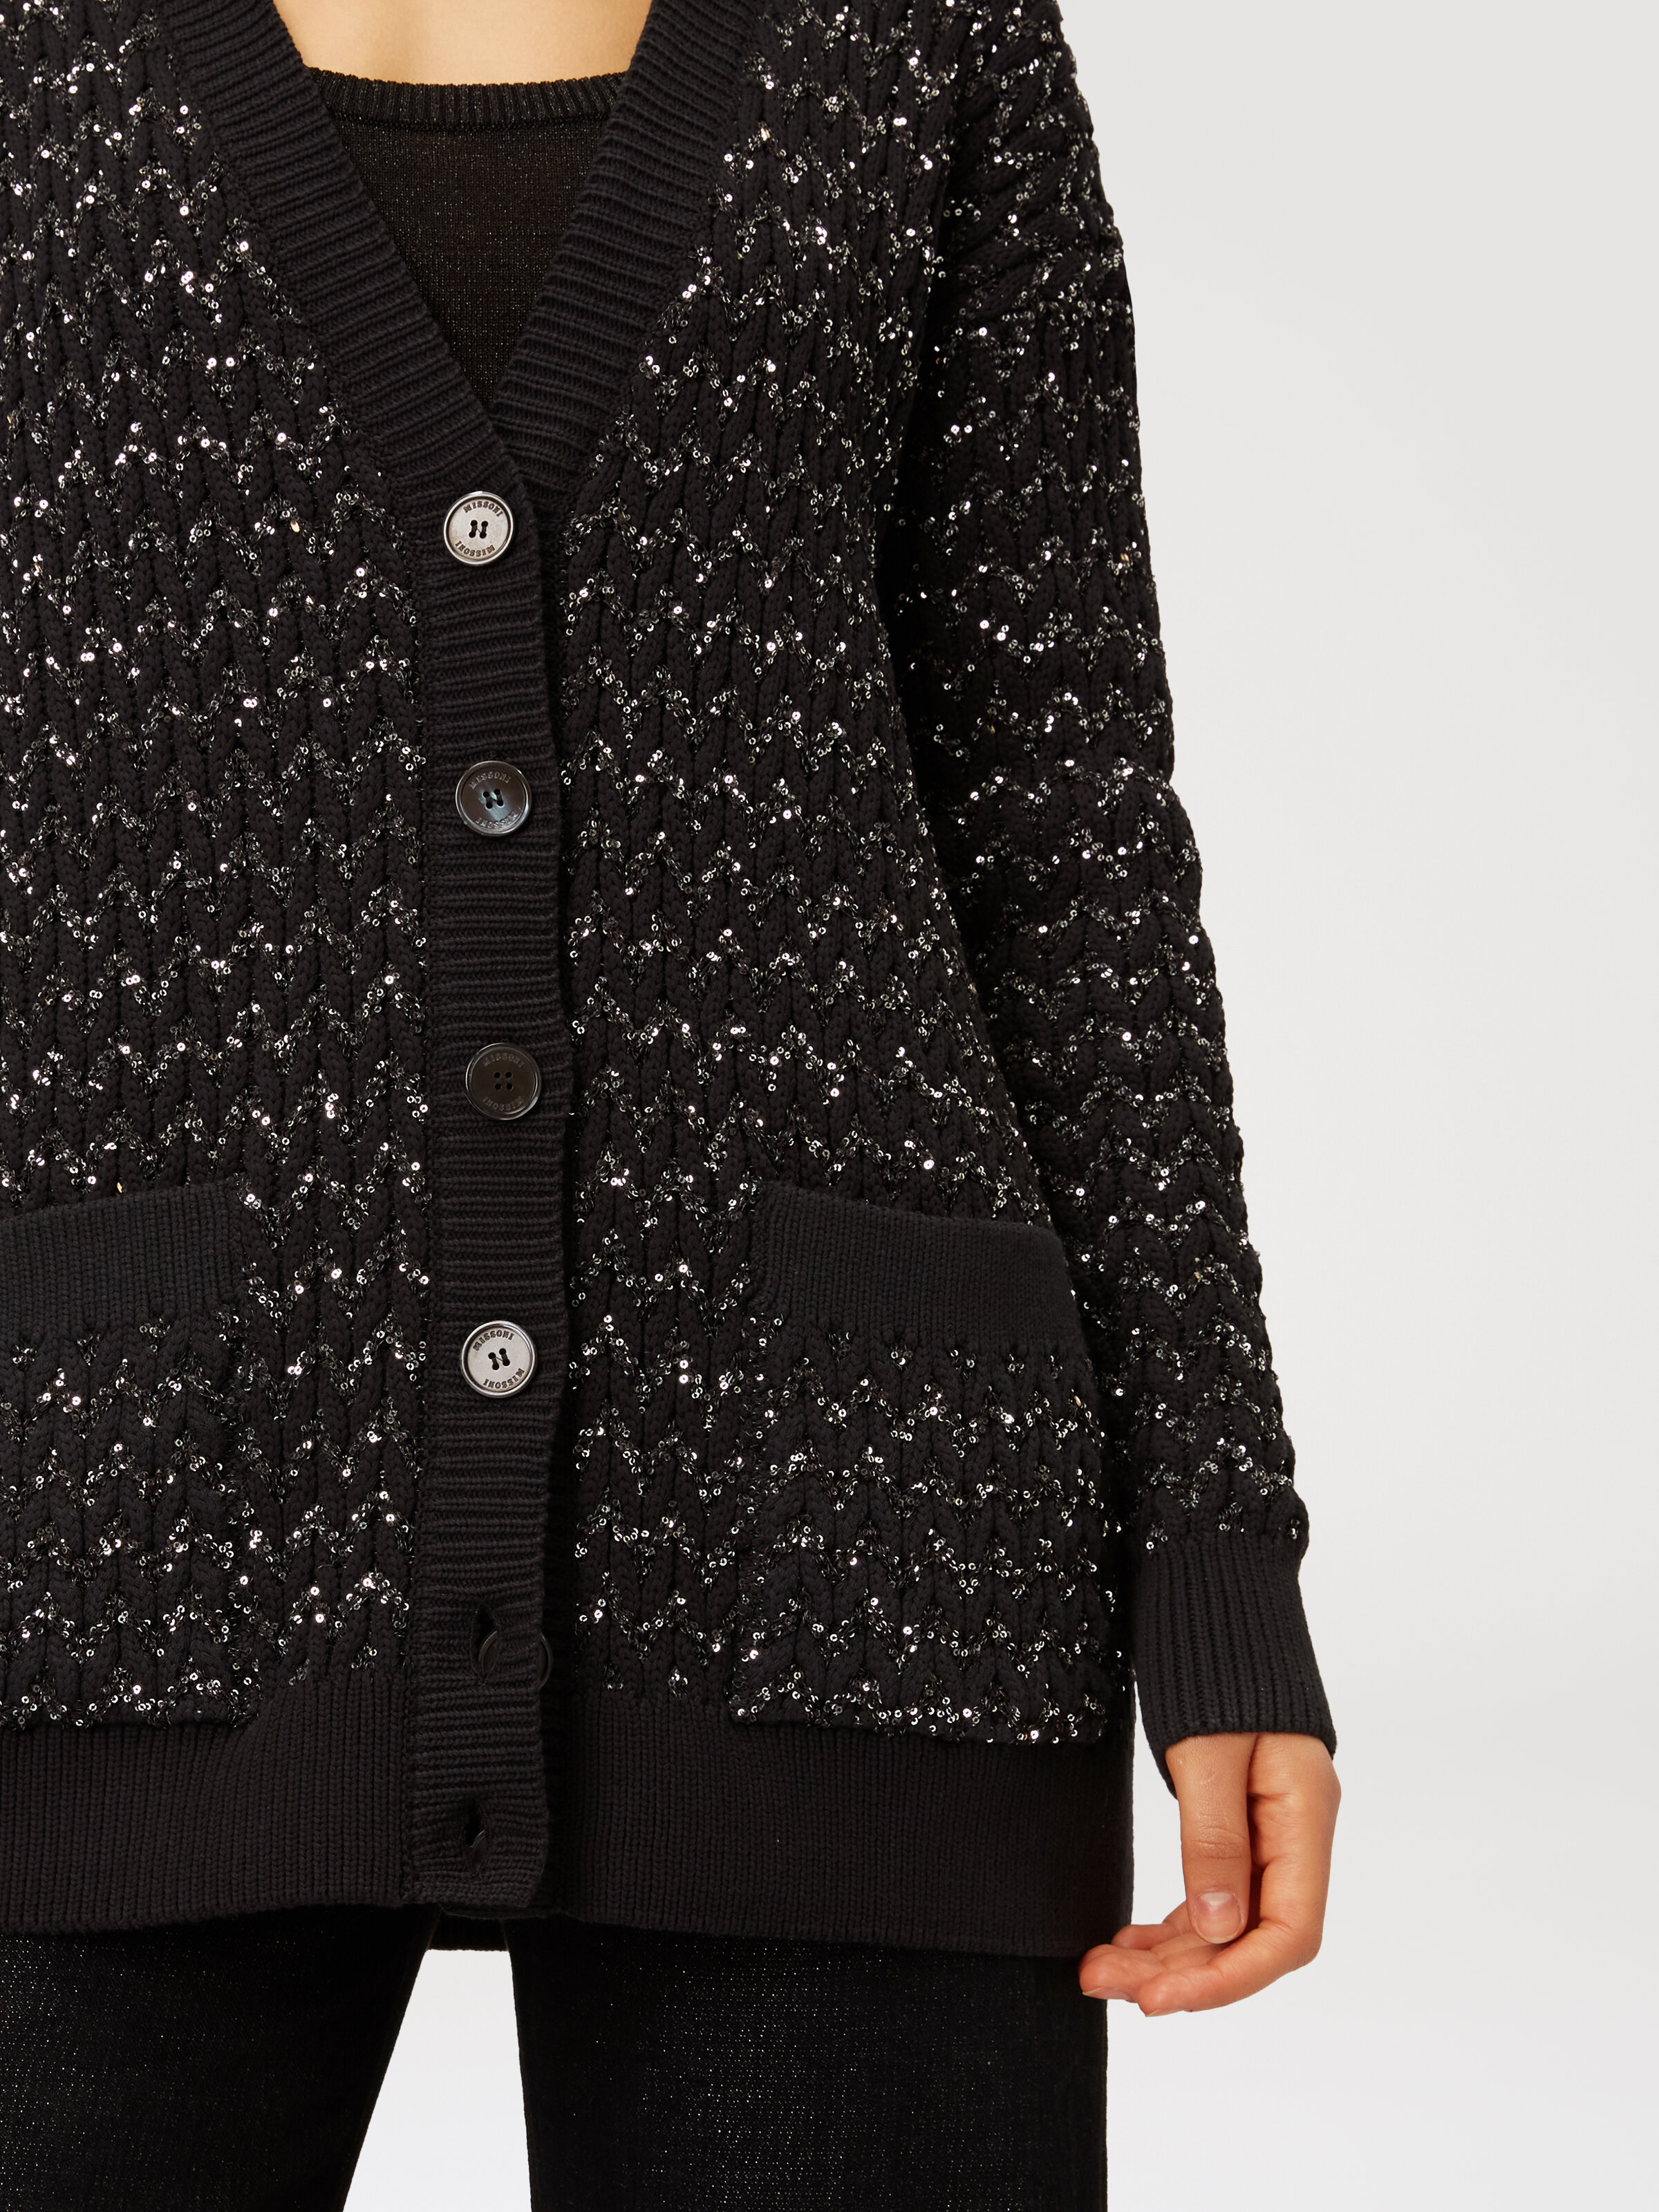 Oversized cardigan in knit with braiding and sequins, Black    - 4